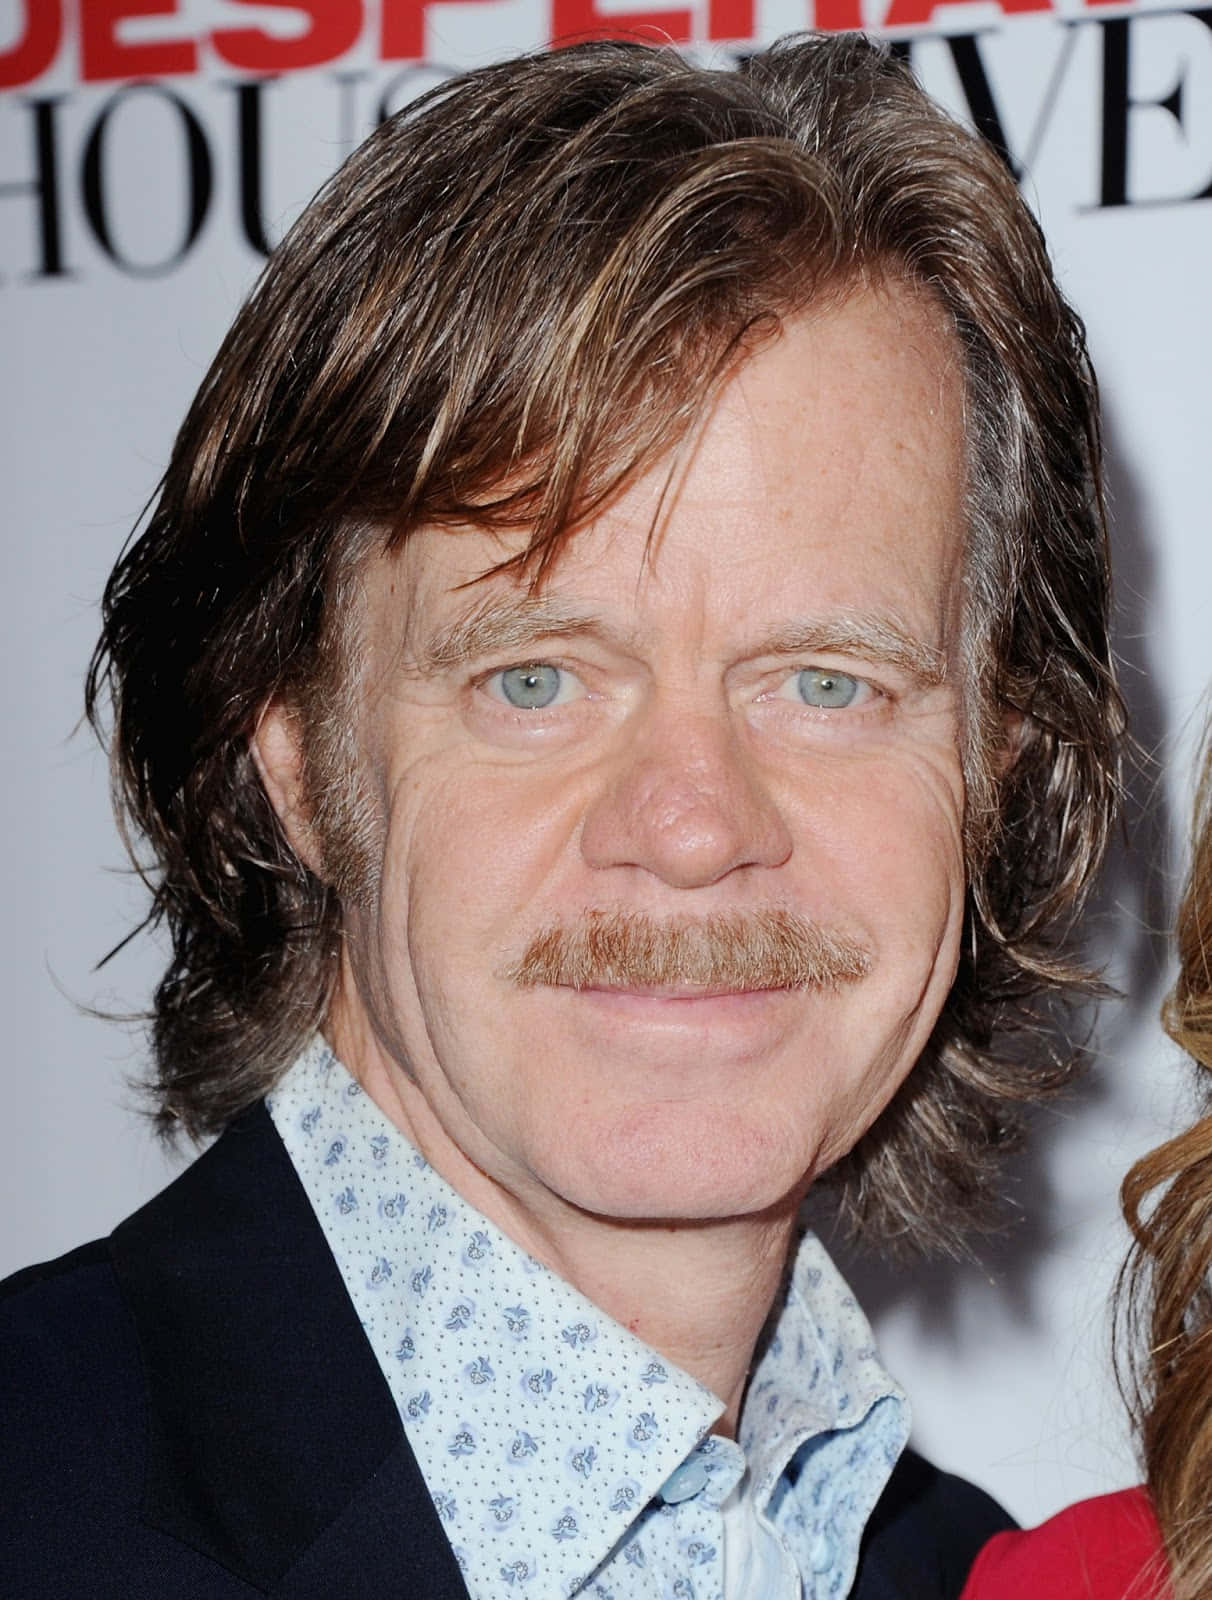 Award-winning actor William H. Macy posing for a photograph Wallpaper